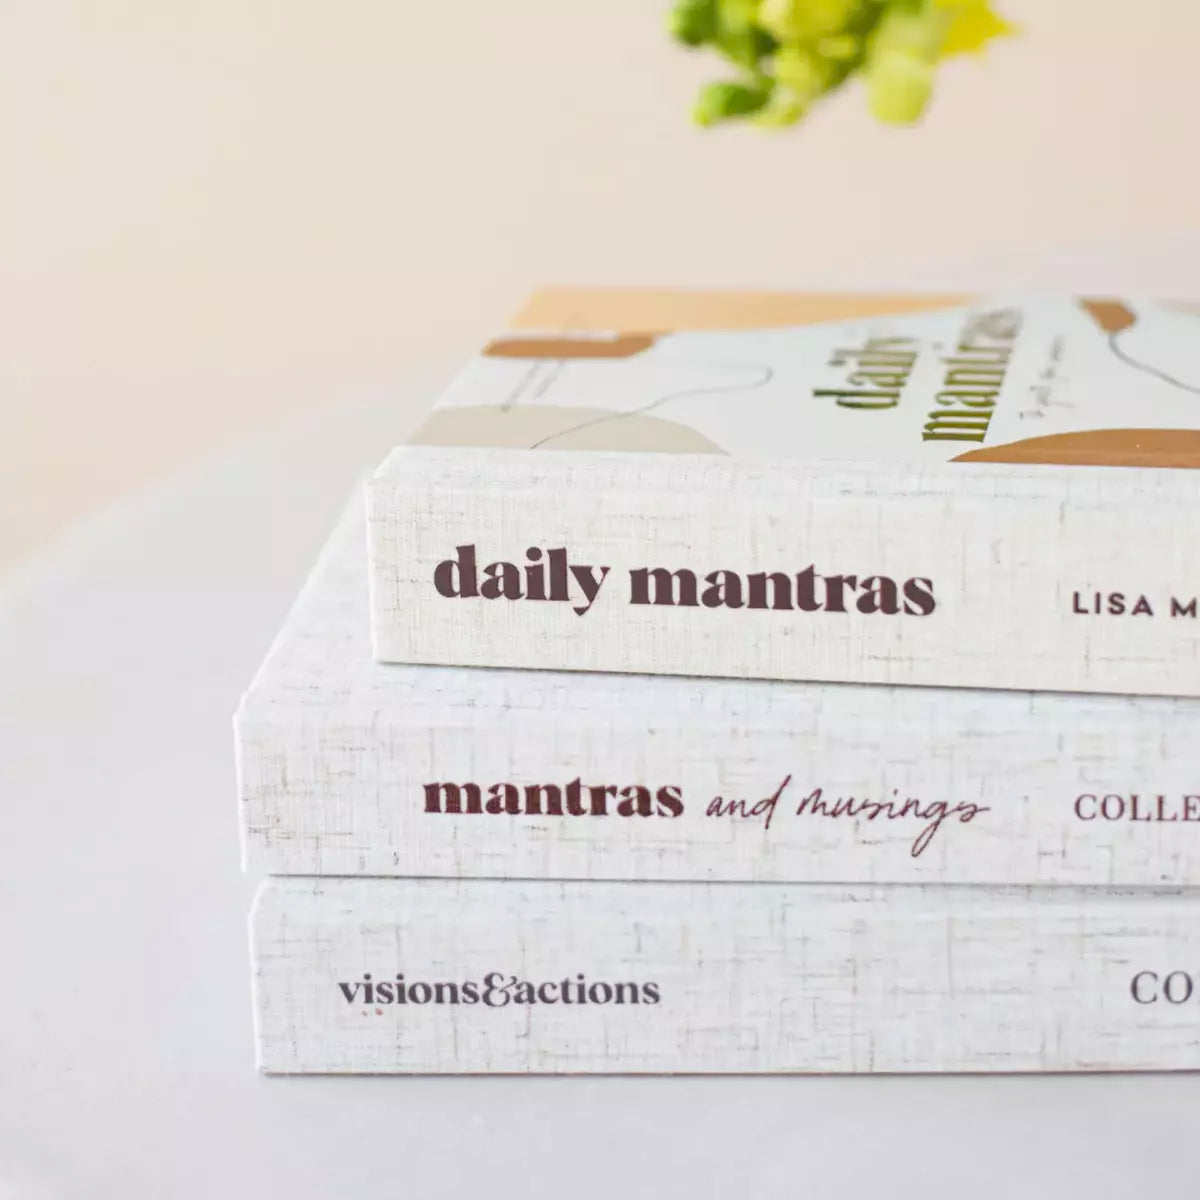 Collective Hub's Daily Mantras to Ignite Your Purpose Second Edition - inspiring quotes and visions.